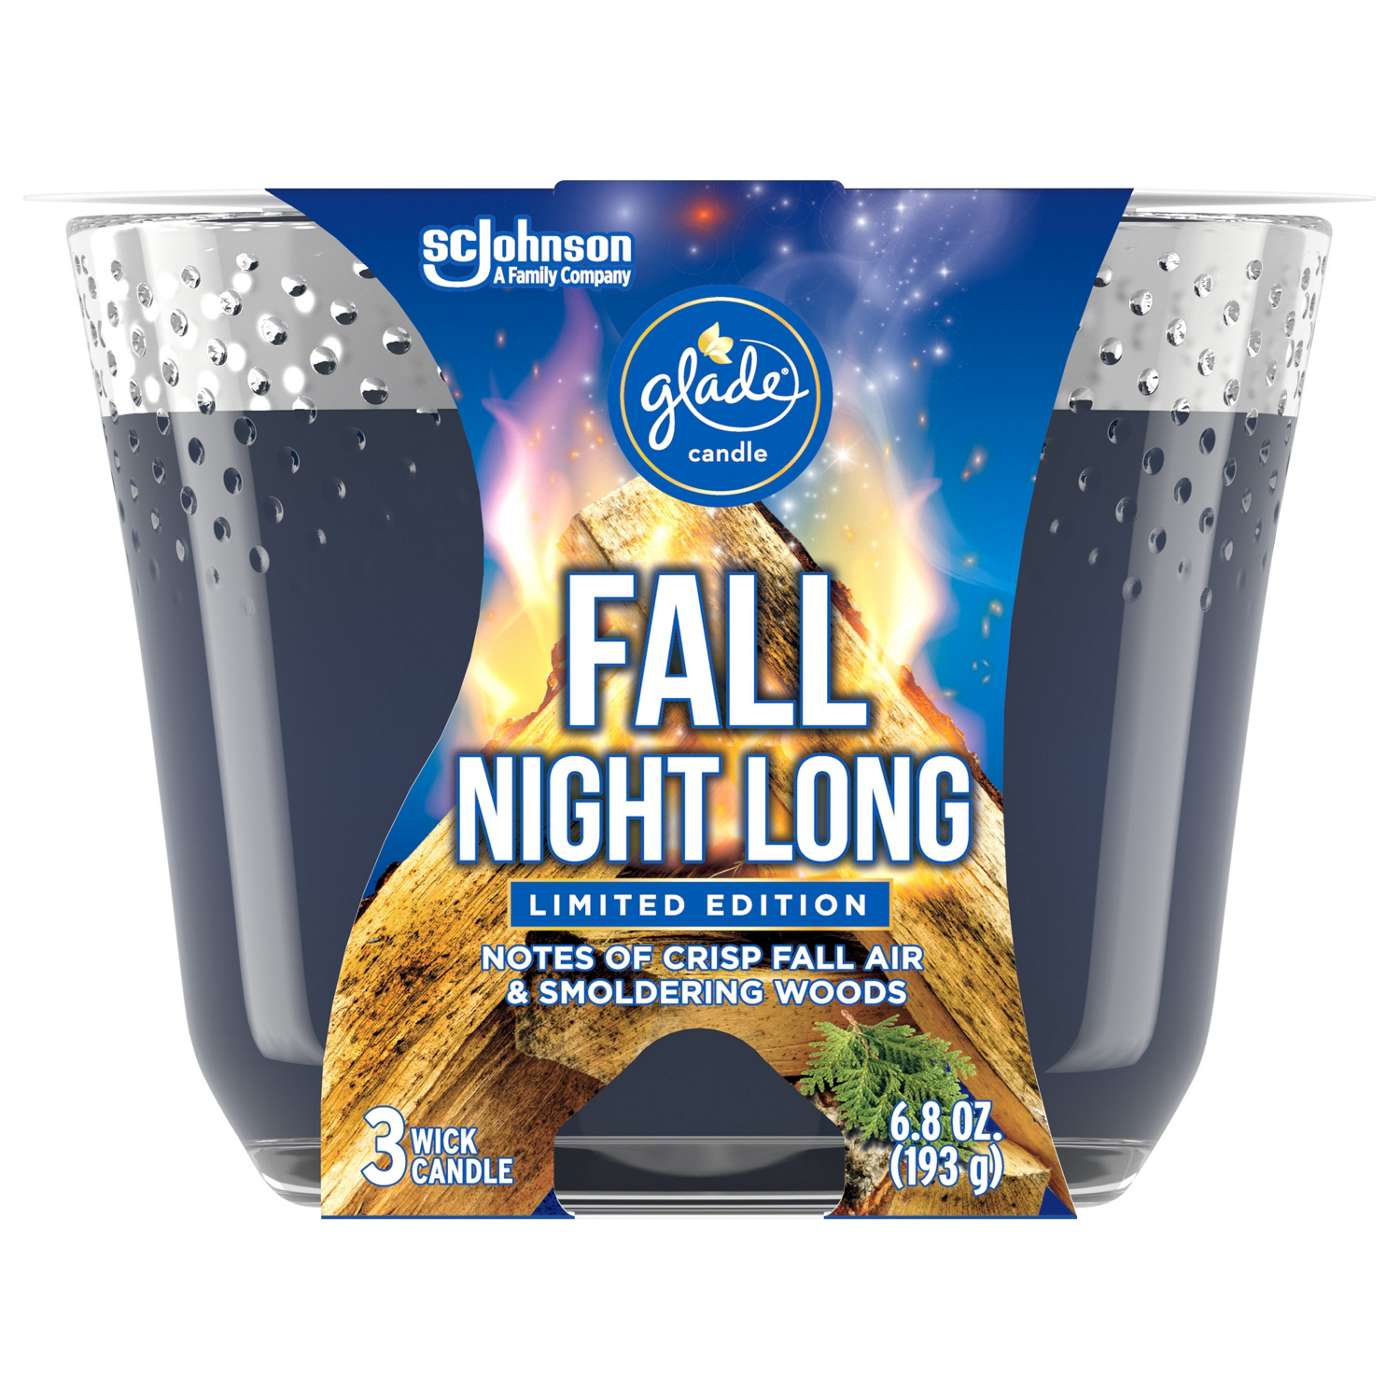 Glade Fall Night Long 3 Wick Candle; image 1 of 3